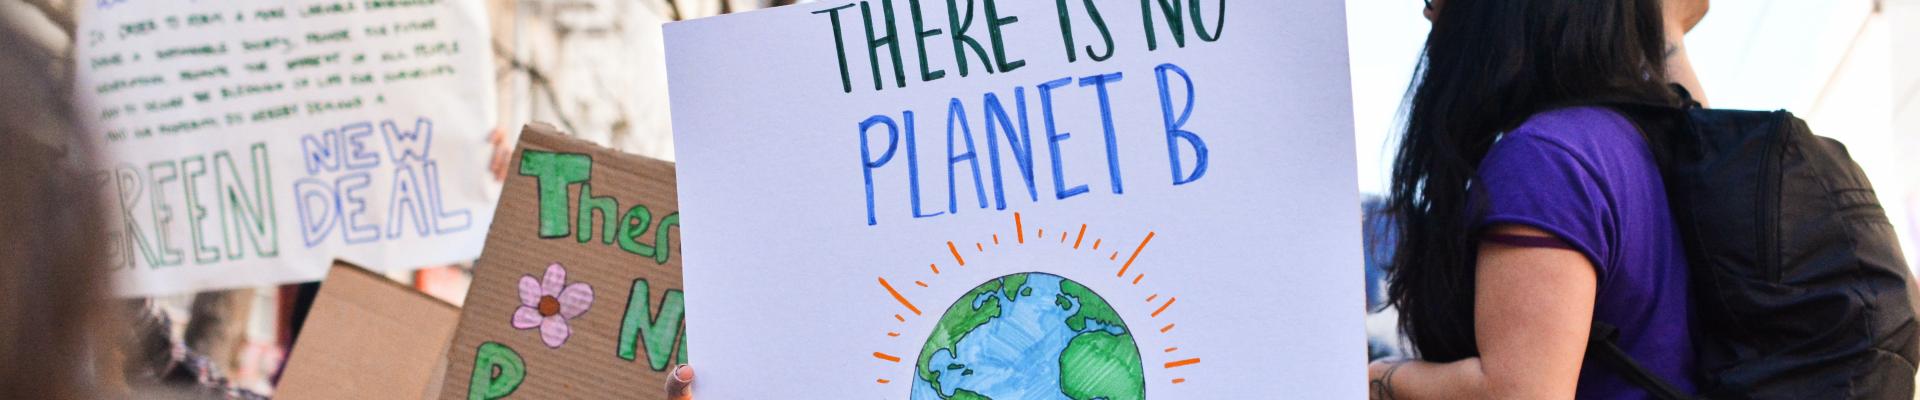 Protestors holding up a sign that says there is no planet B